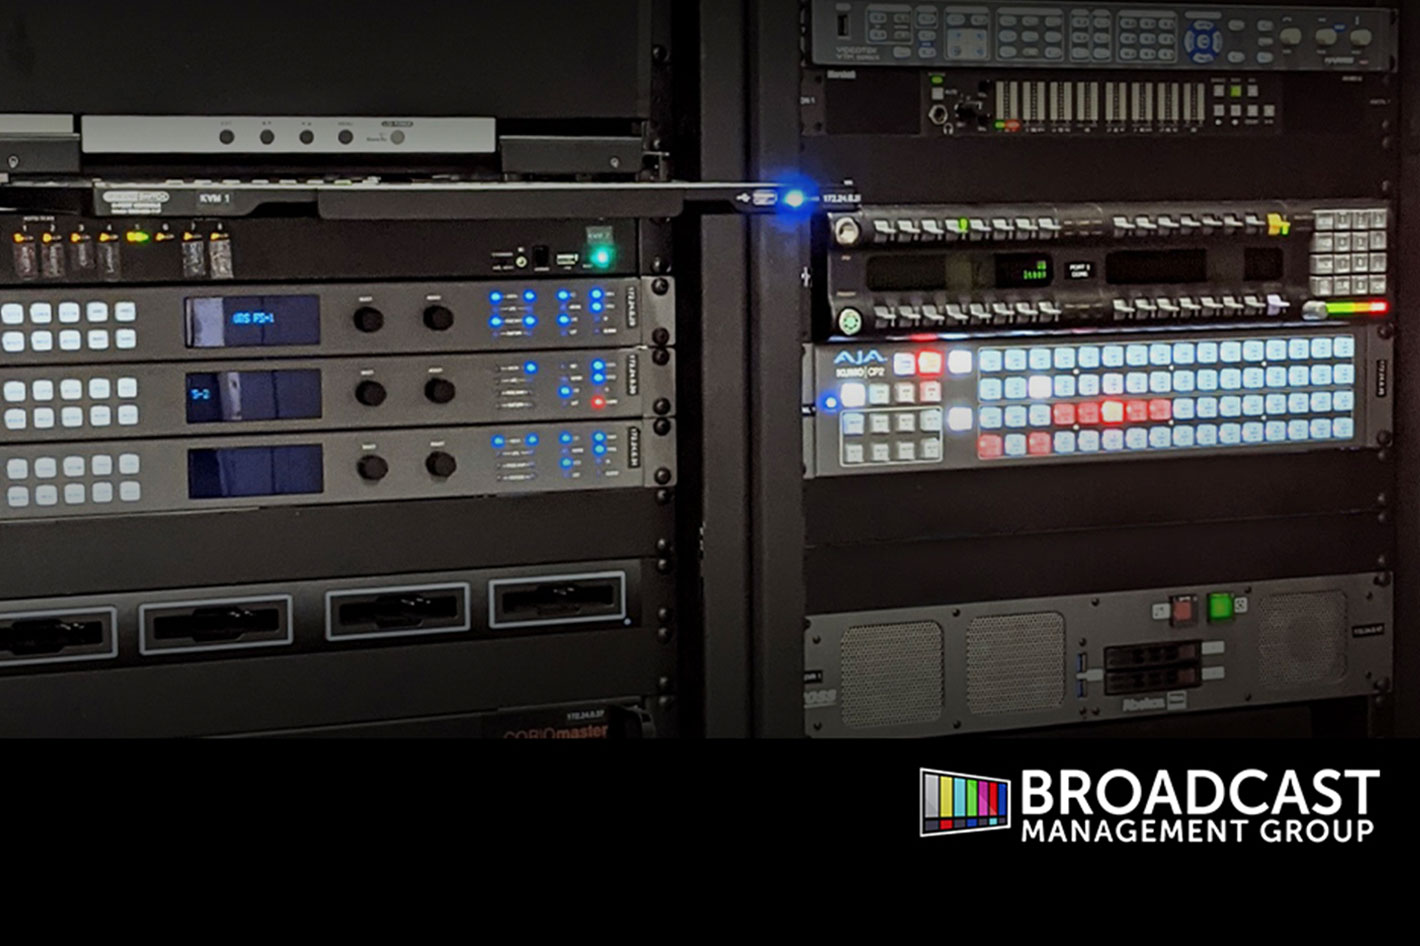 Investment bank UBS new live studio uses AJA gear